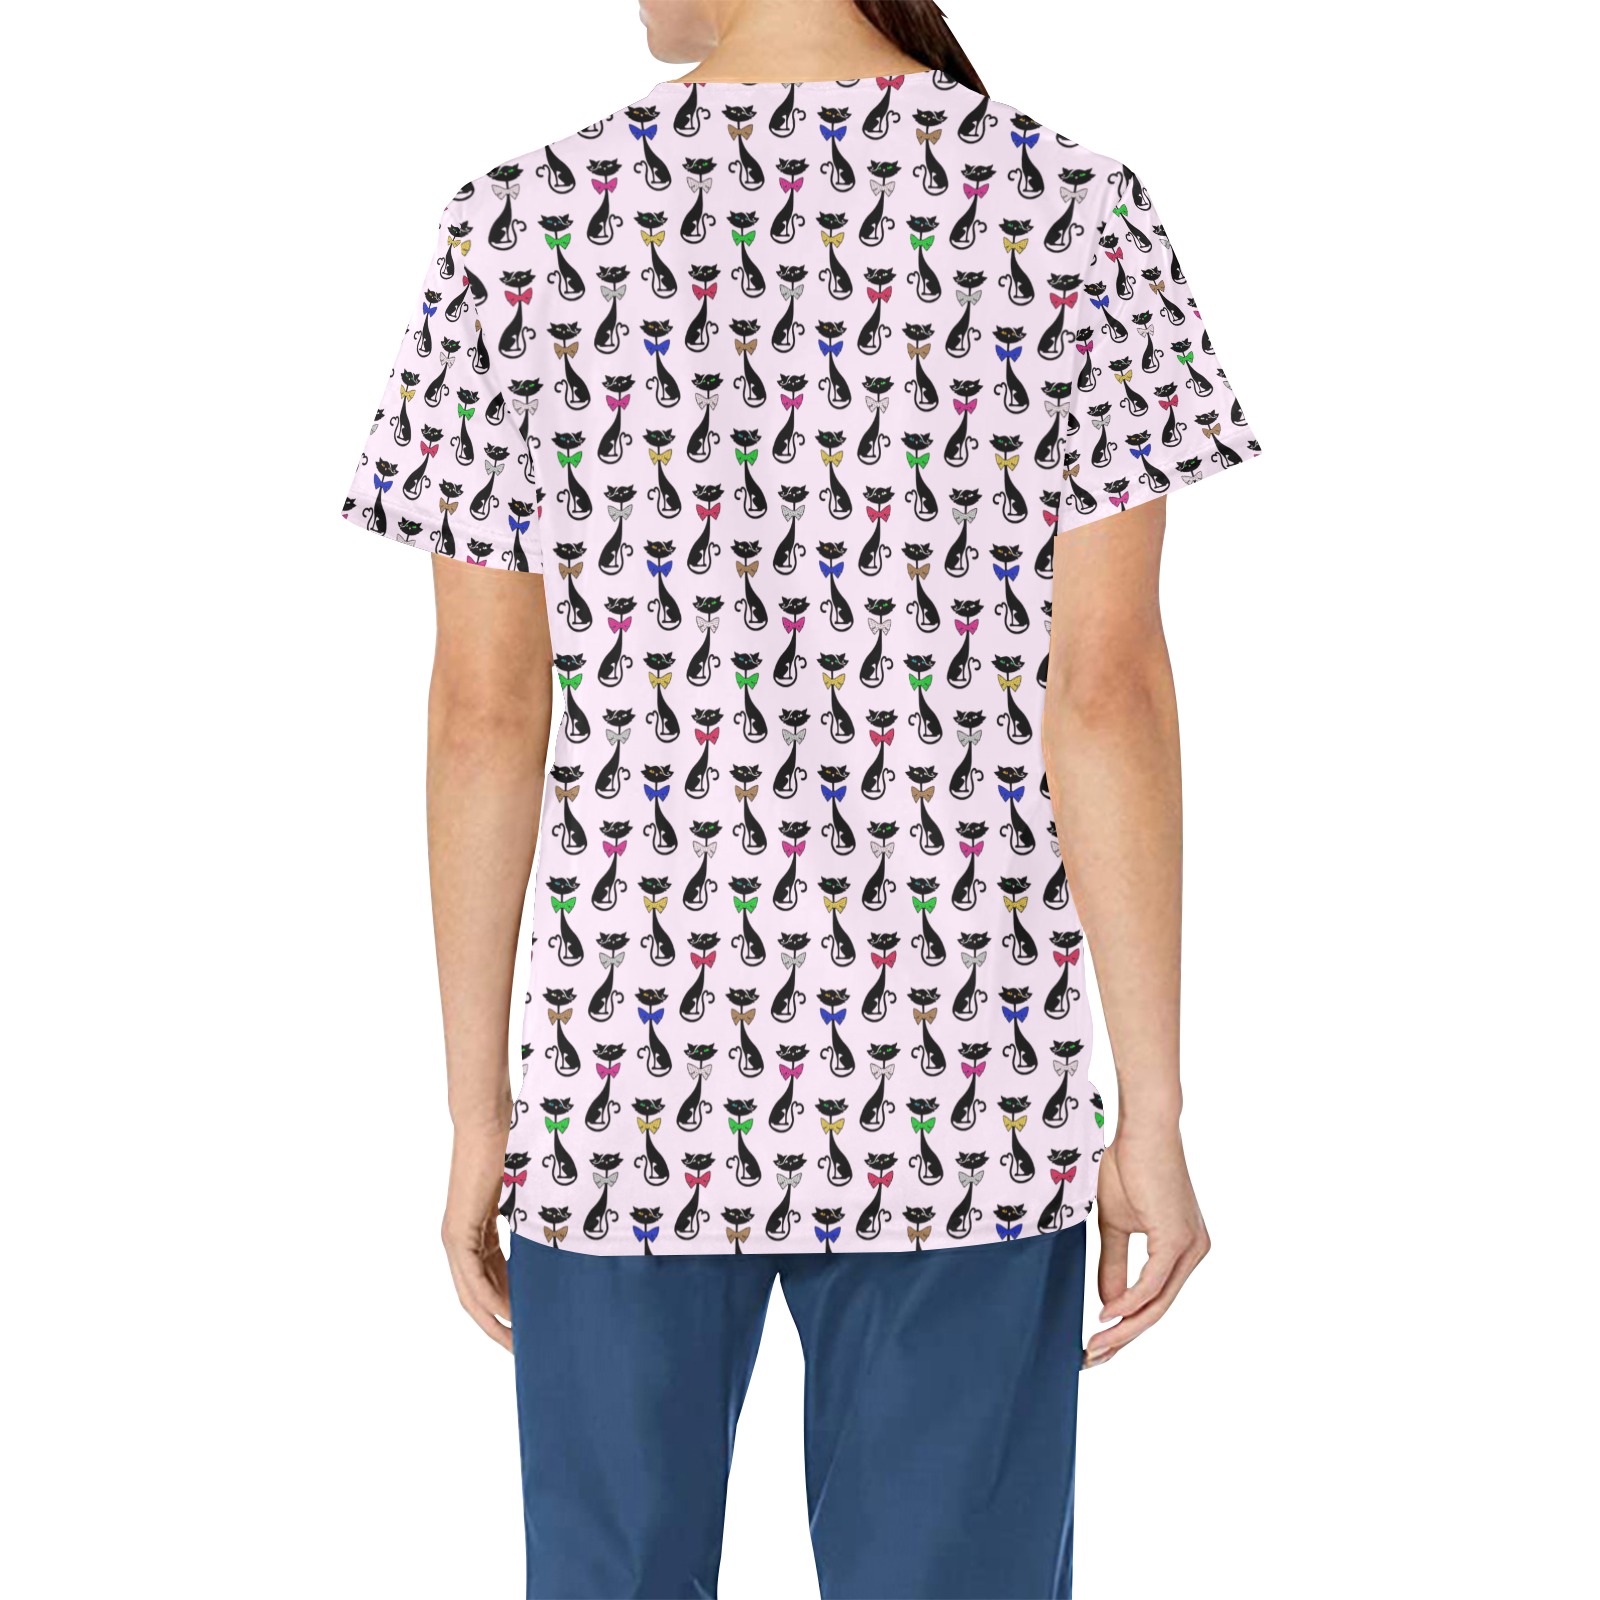 Black Cats Wearing Bow Ties - Pink All Over Print Scrub Top